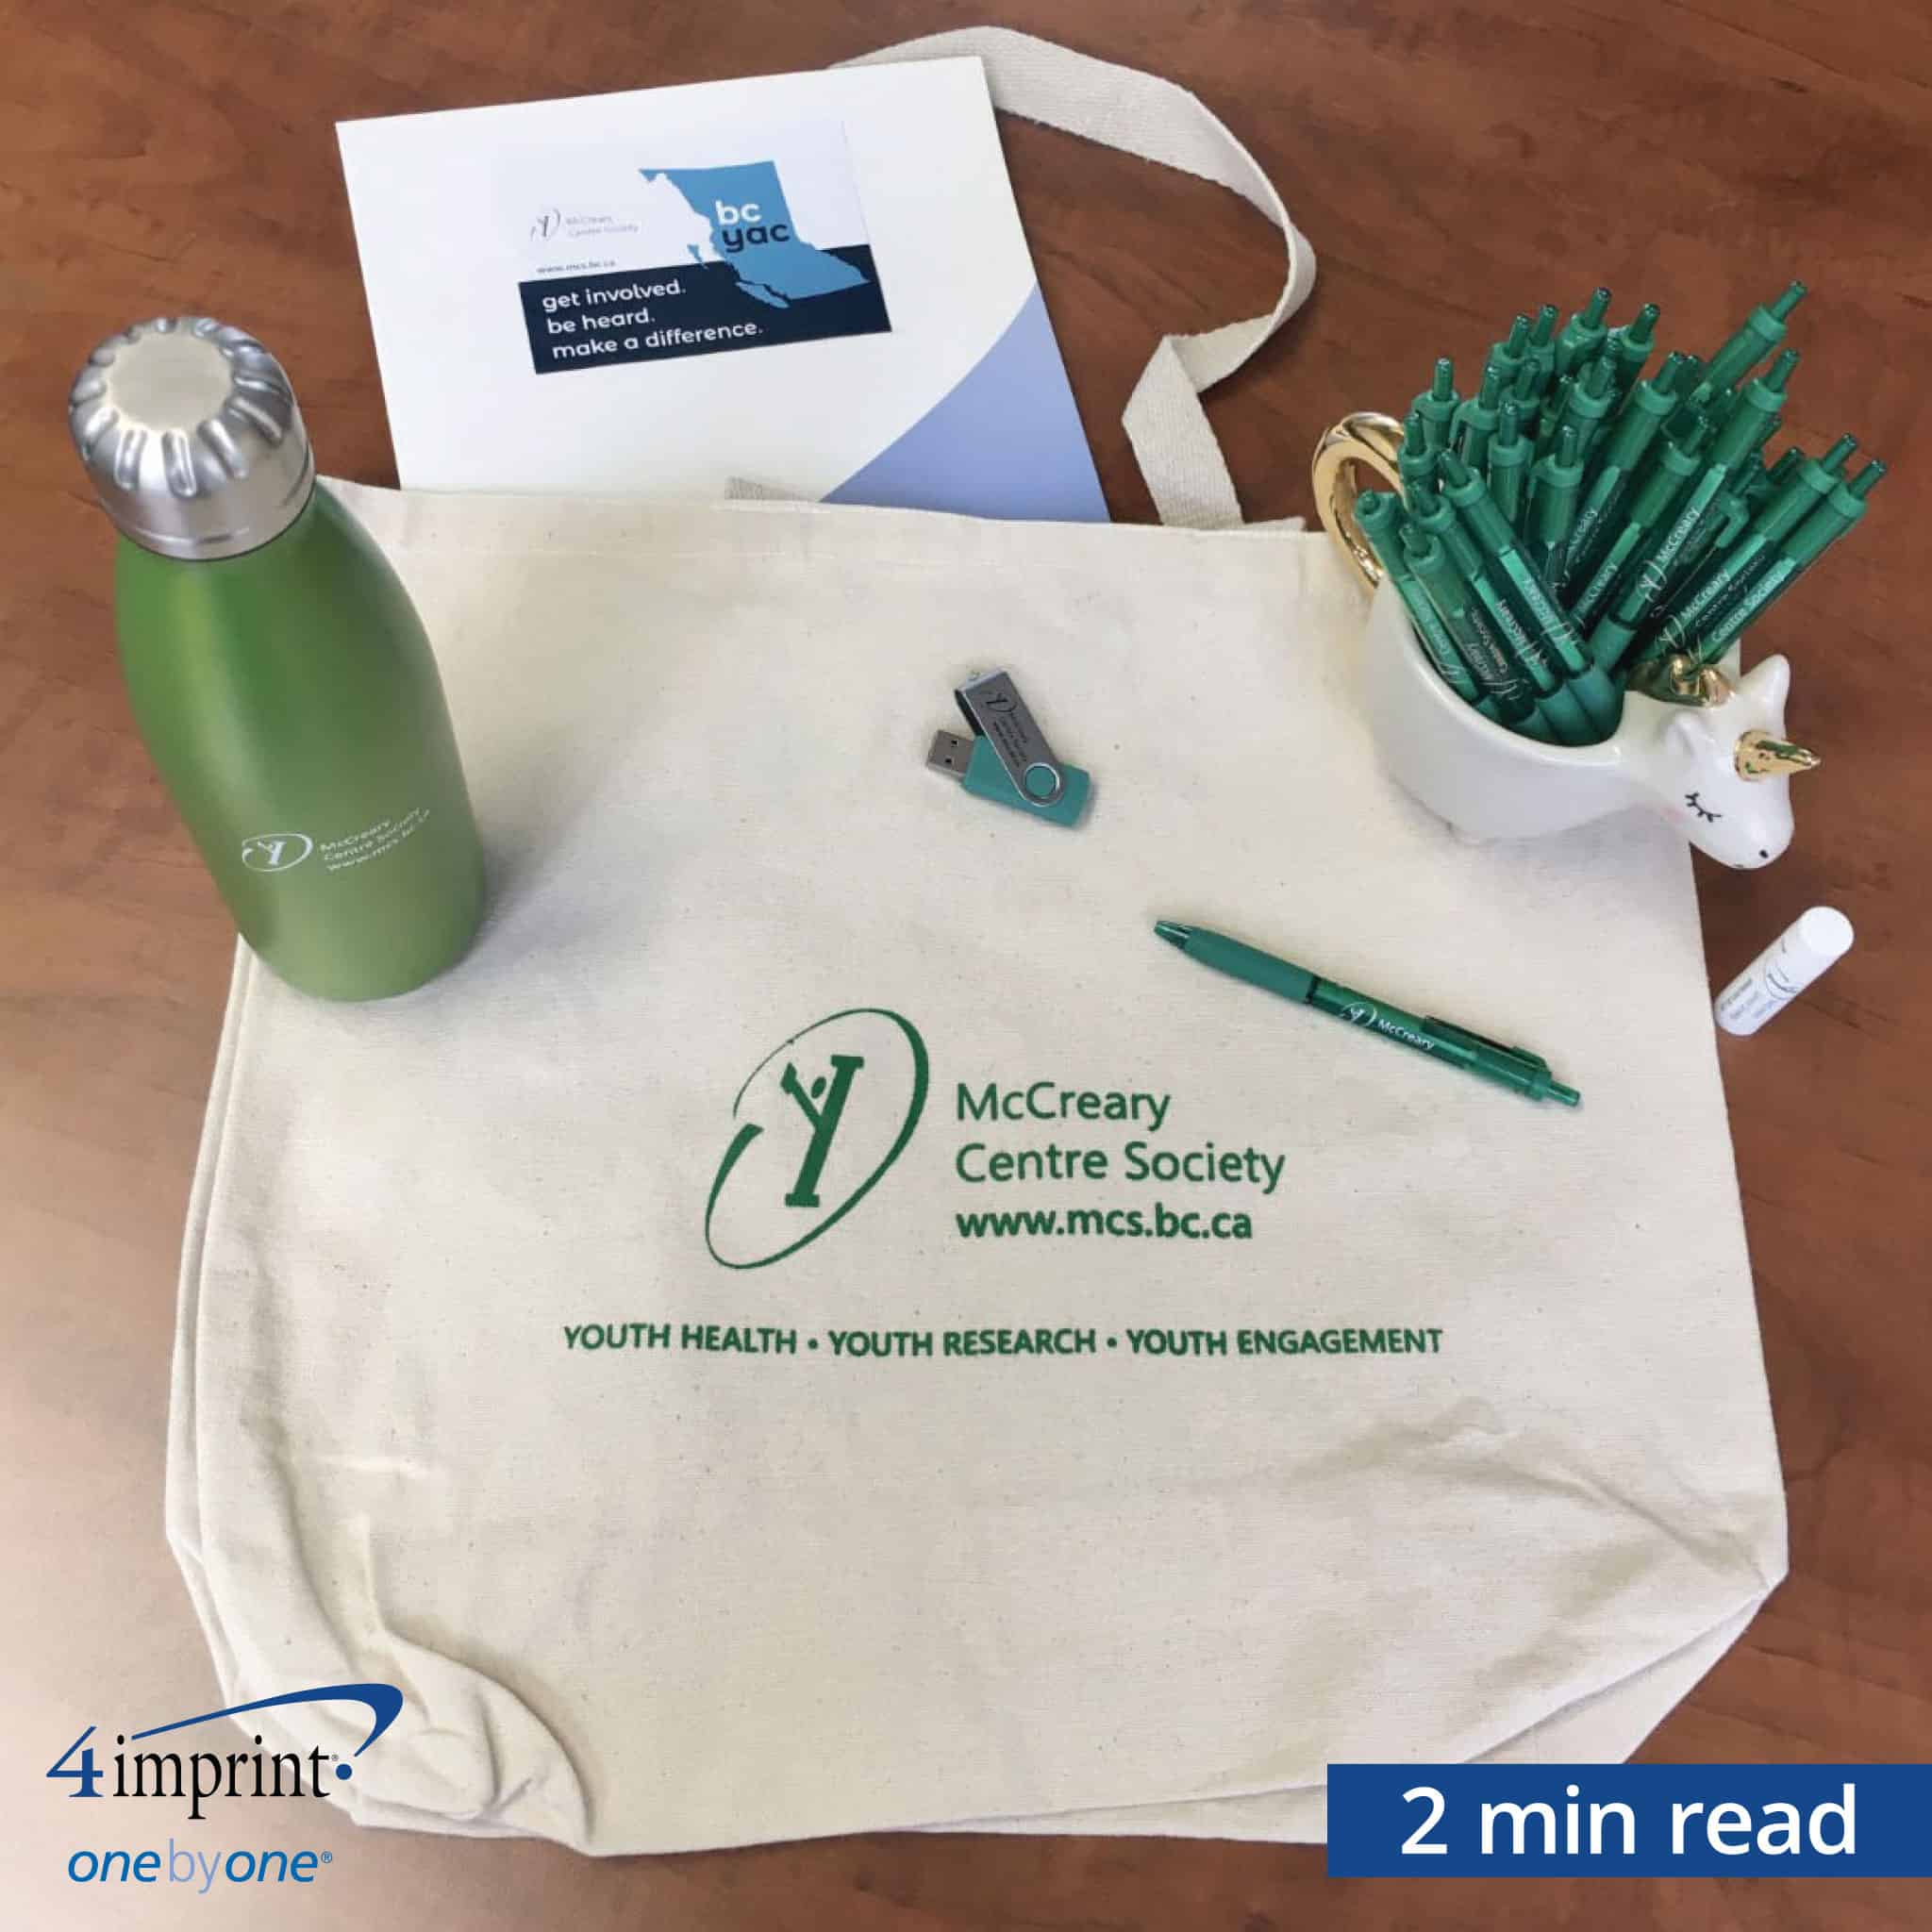 Promotional tote bag, water bottle, USB drive, lip balm and a cup of pens. 2 min read time.